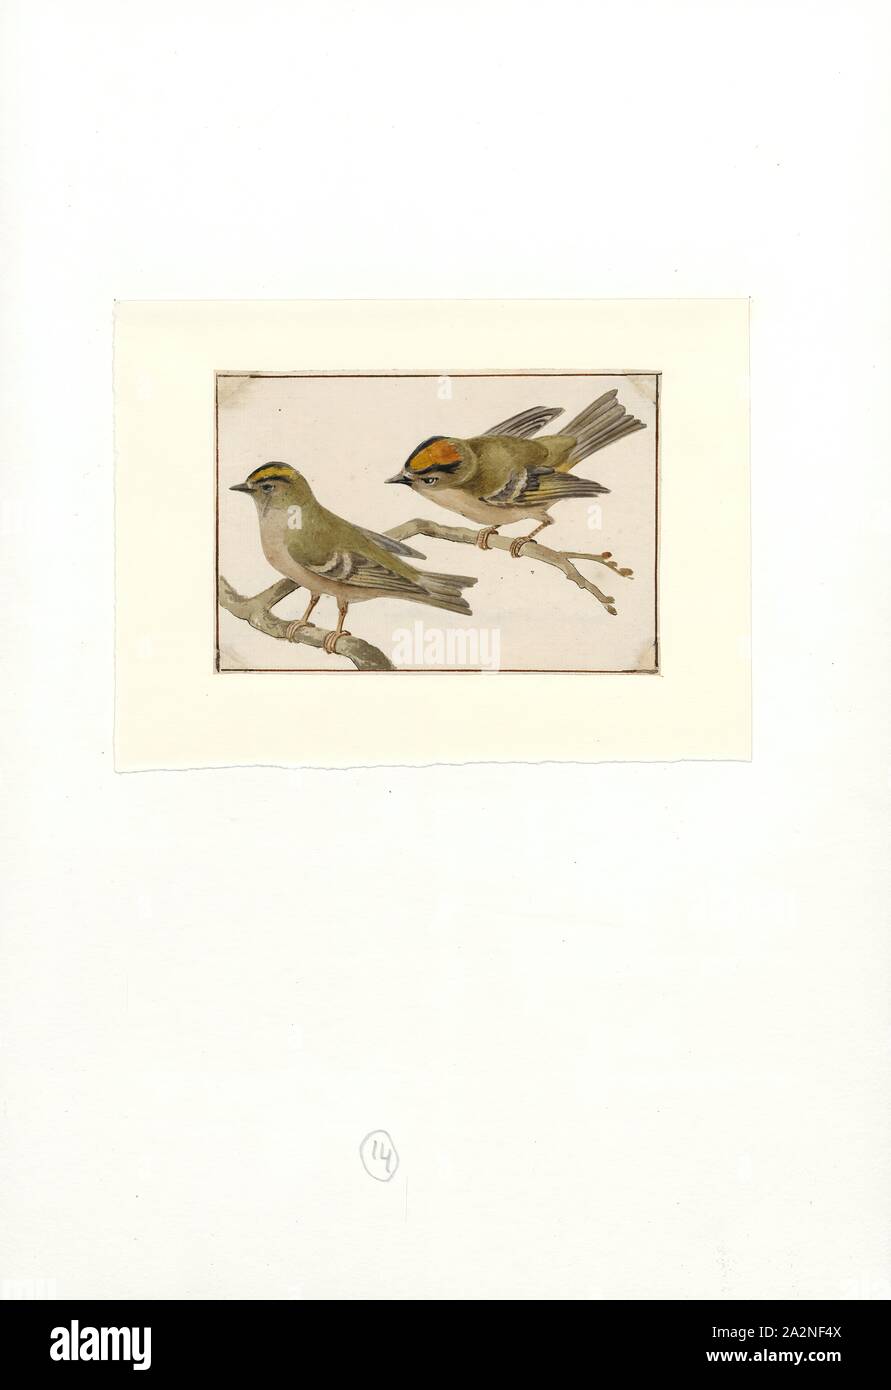 Regulus ignicapillus, Print, The common firecrest (Regulus ignicapilla) also known as the firecrest, is a very small passerine bird in the kinglet family. It breeds in most of temperate Europe and northwestern Africa, and is partially migratory, with birds from central Europe wintering to the south and west of their breeding range. Firecrests in the Balearic Islands and north Africa are widely recognised as a separate subspecies, but the population on Madeira, previously also treated as a subspecies, is now treated as a distinct species, the Madeira firecrest, Regulus madeirensis. A fossil Stock Photo